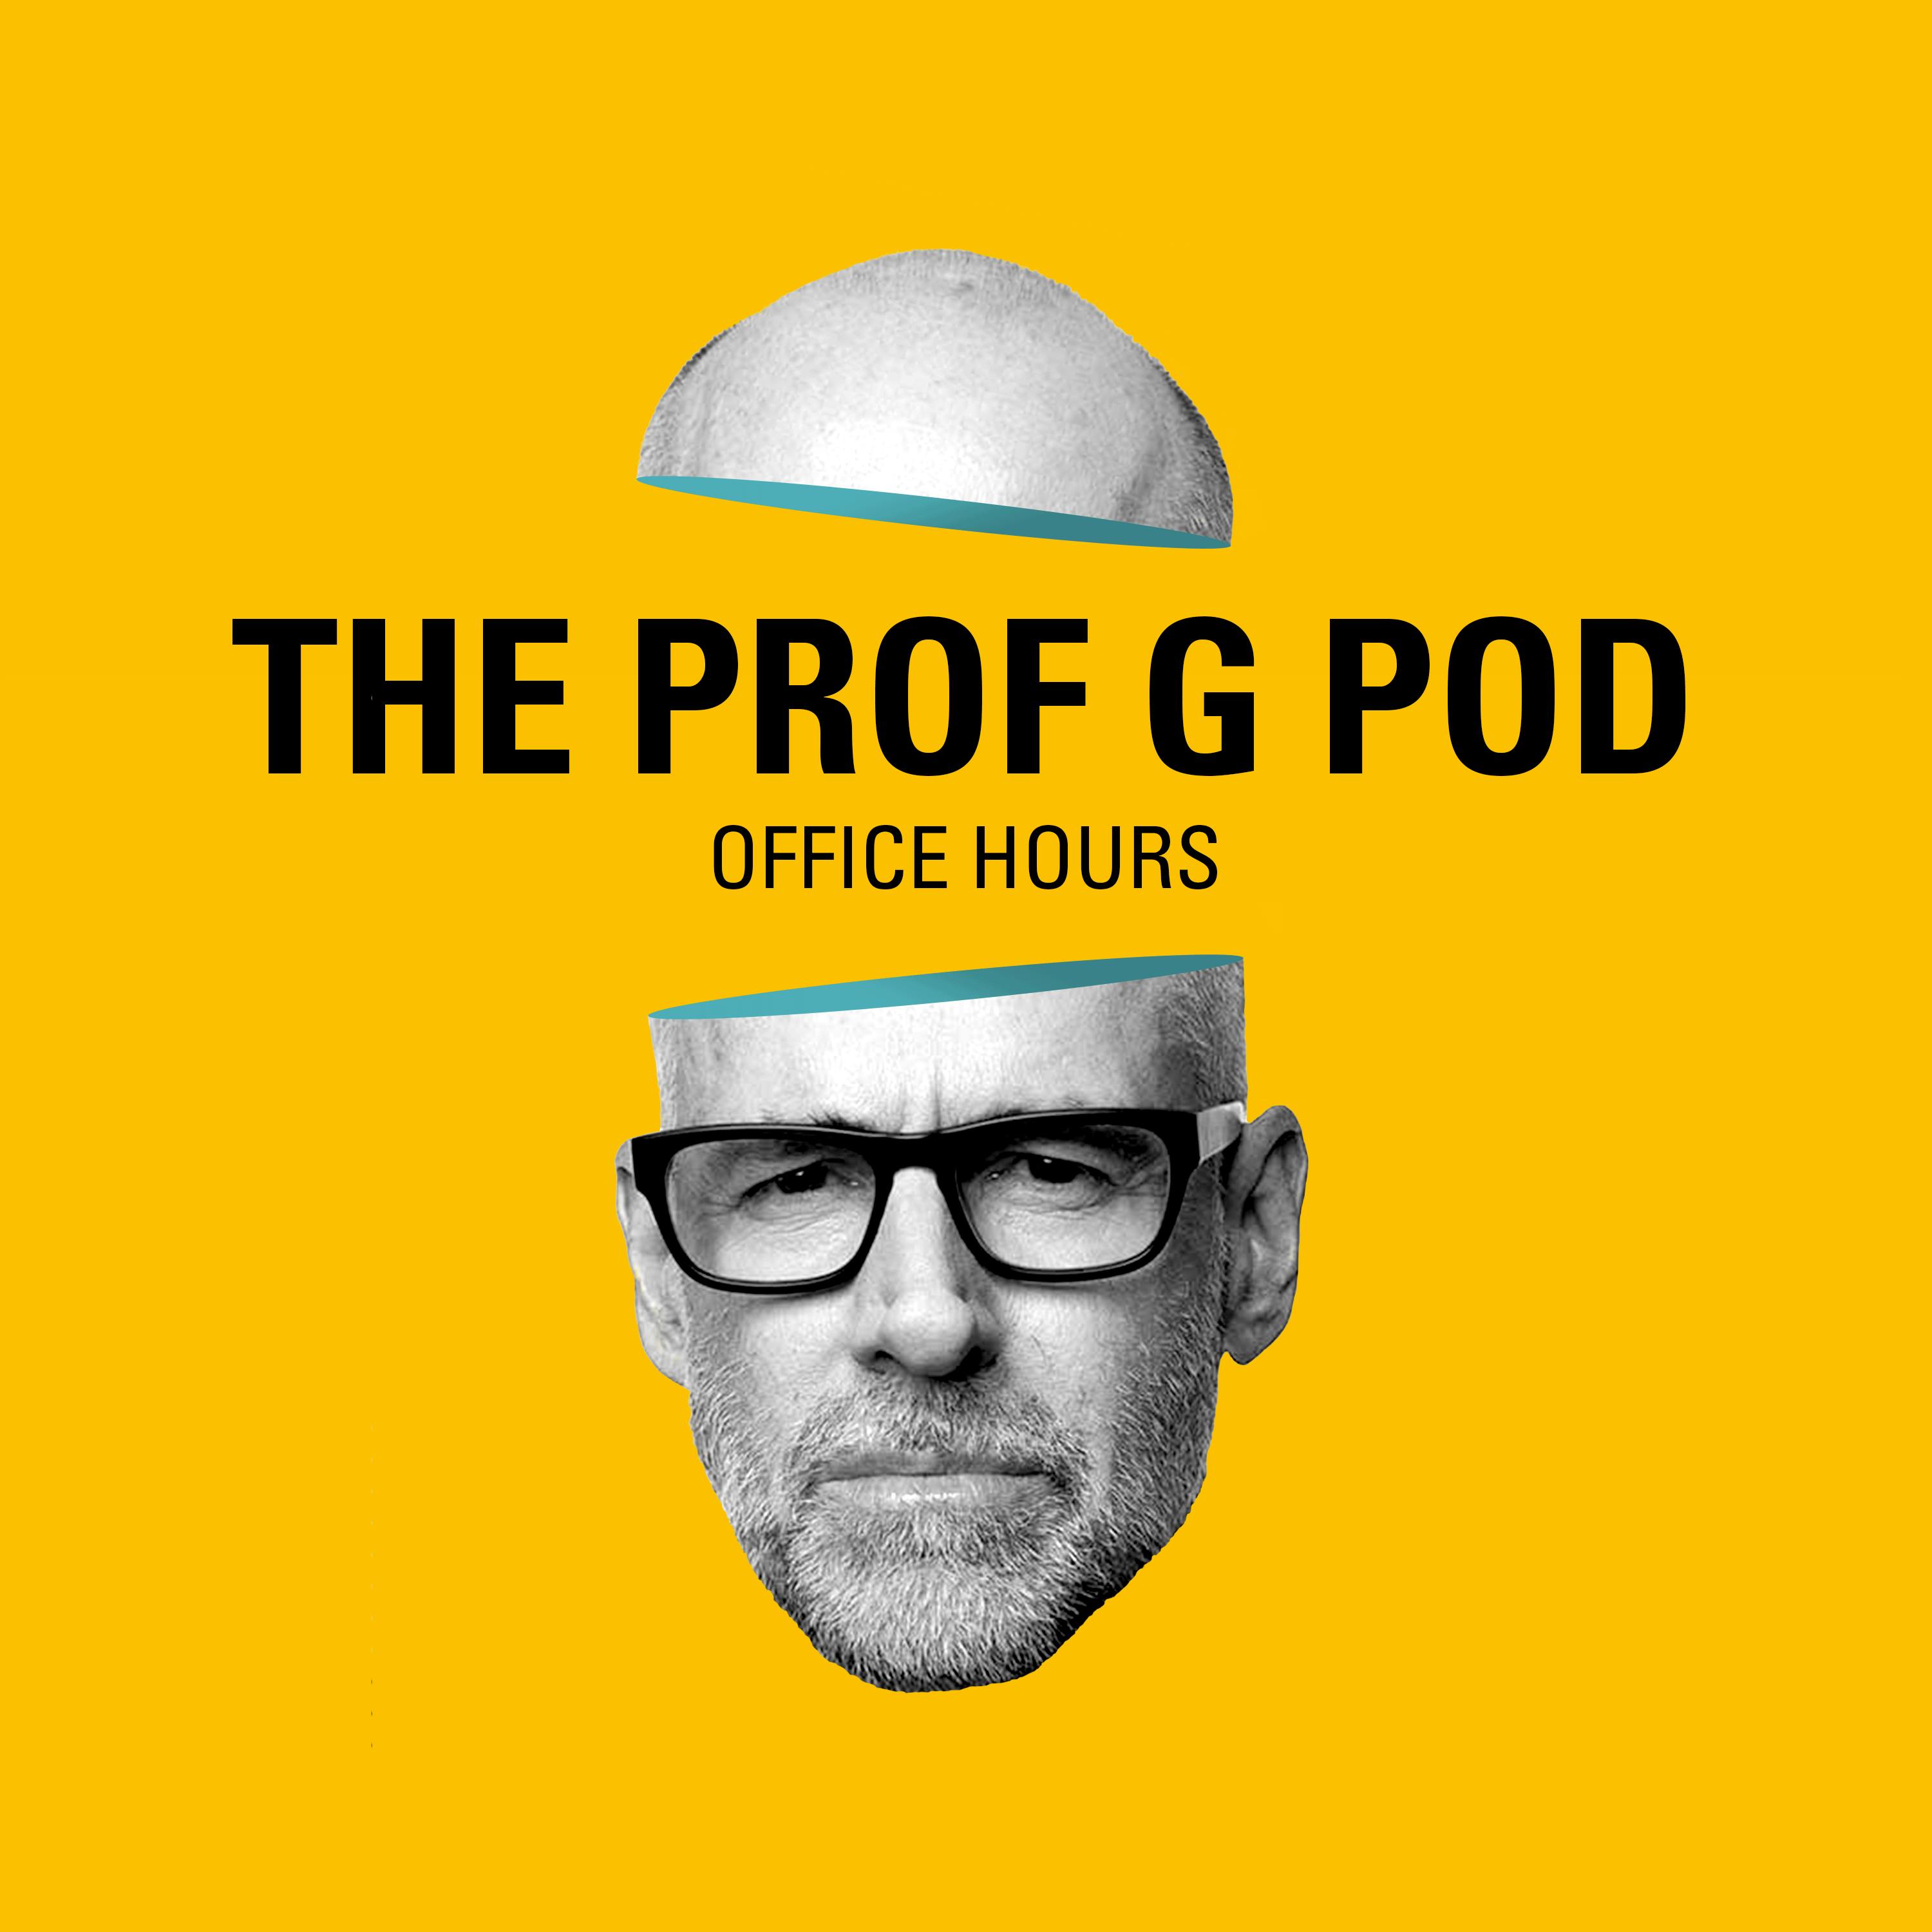 Office Hours: Apple Stock and China. Should Young People Pursue a Career in Sales? And How to Bounce Back After Layoffs by Vox Media Podcast Network